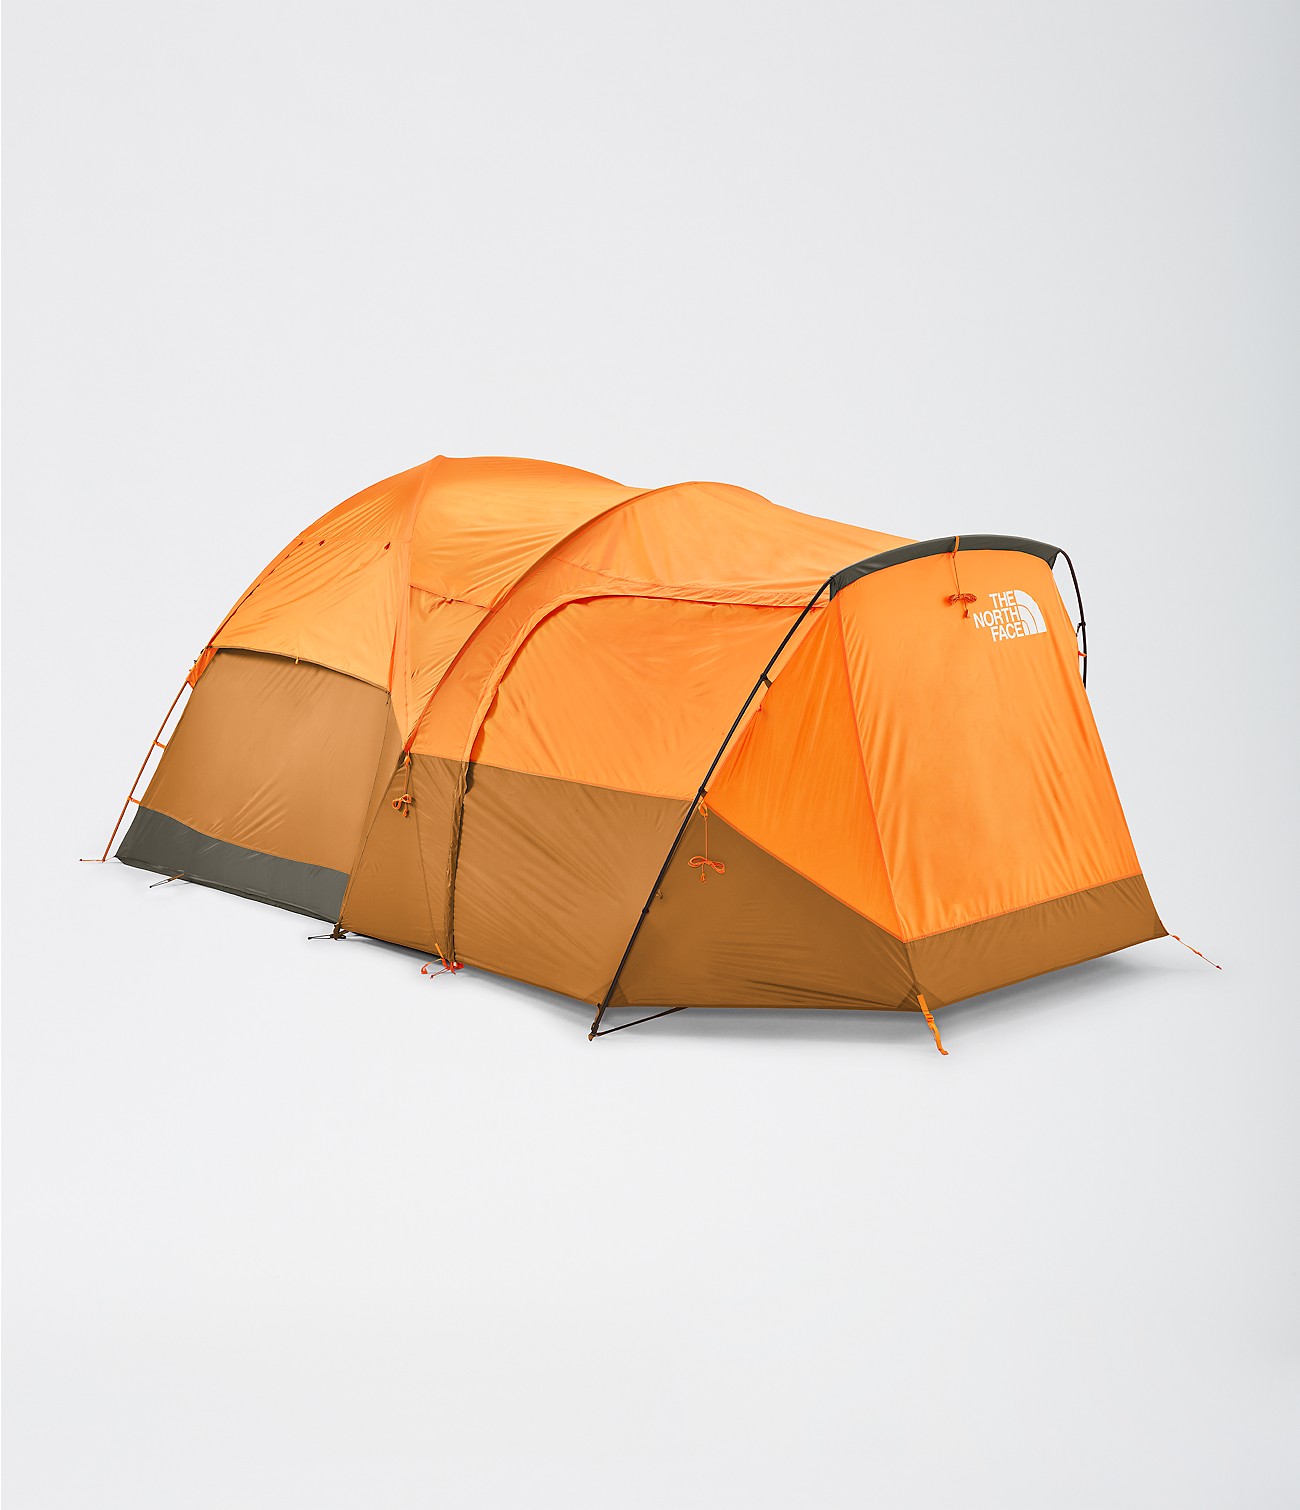 Unlock Wilderness' choice in the Rei Vs North Face comparison, the Wawona 6 Tent by The North Face